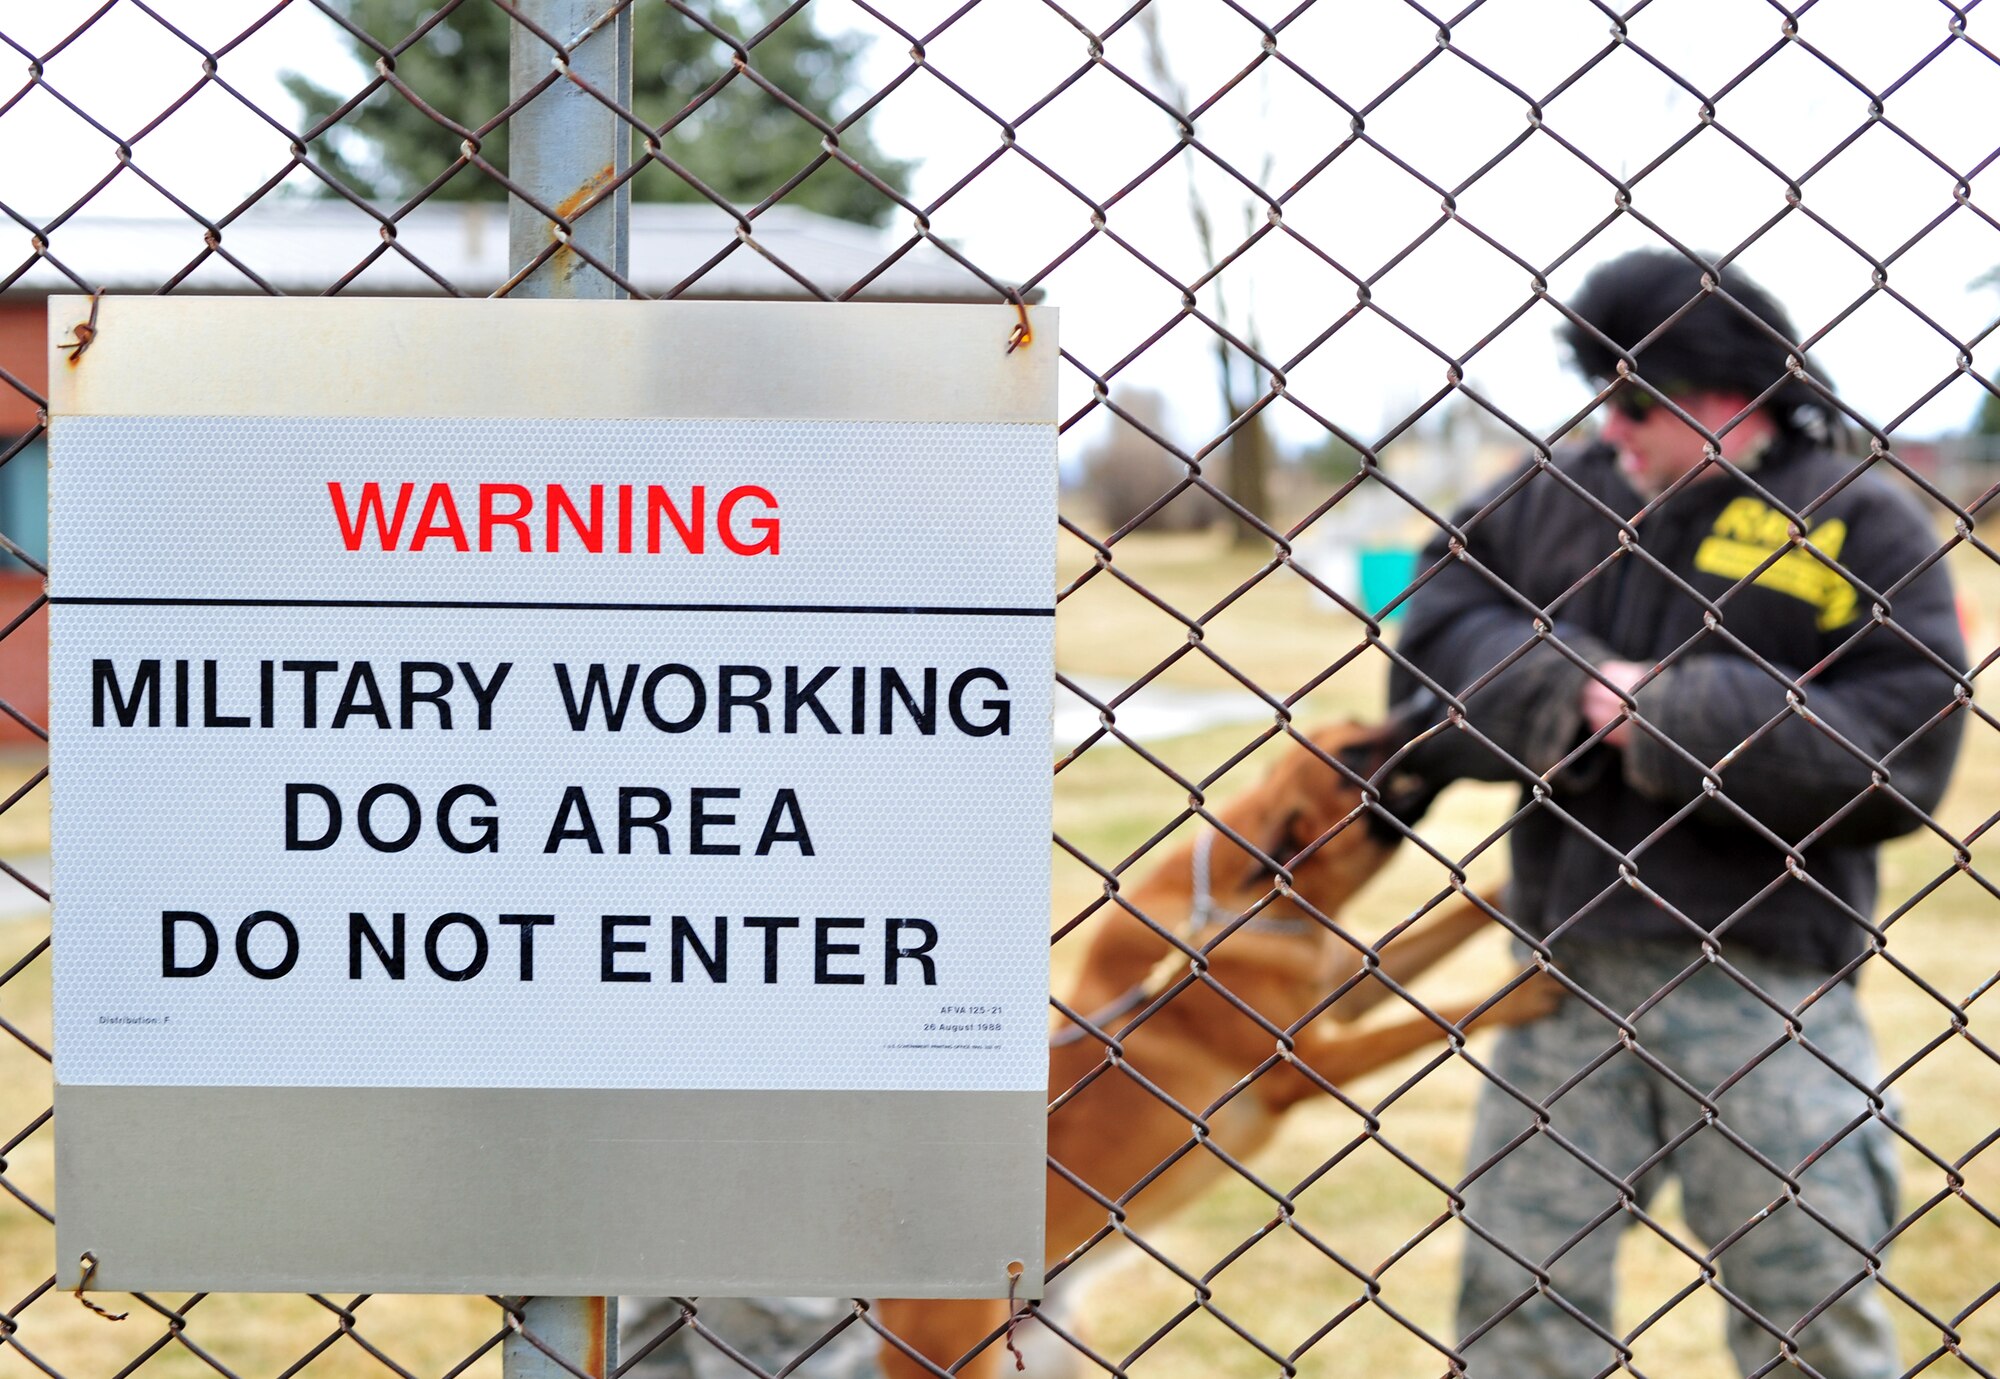 A warning sign is observed on the fence line of the military working dog area to inform people not to enter the area at Fairchild Air Force Base, Wash., March 20, 2013. Military working dog handlers train with their dogs inside the perimeter. (U.S. Air Force photo by Senior Airman Taylor Curry)